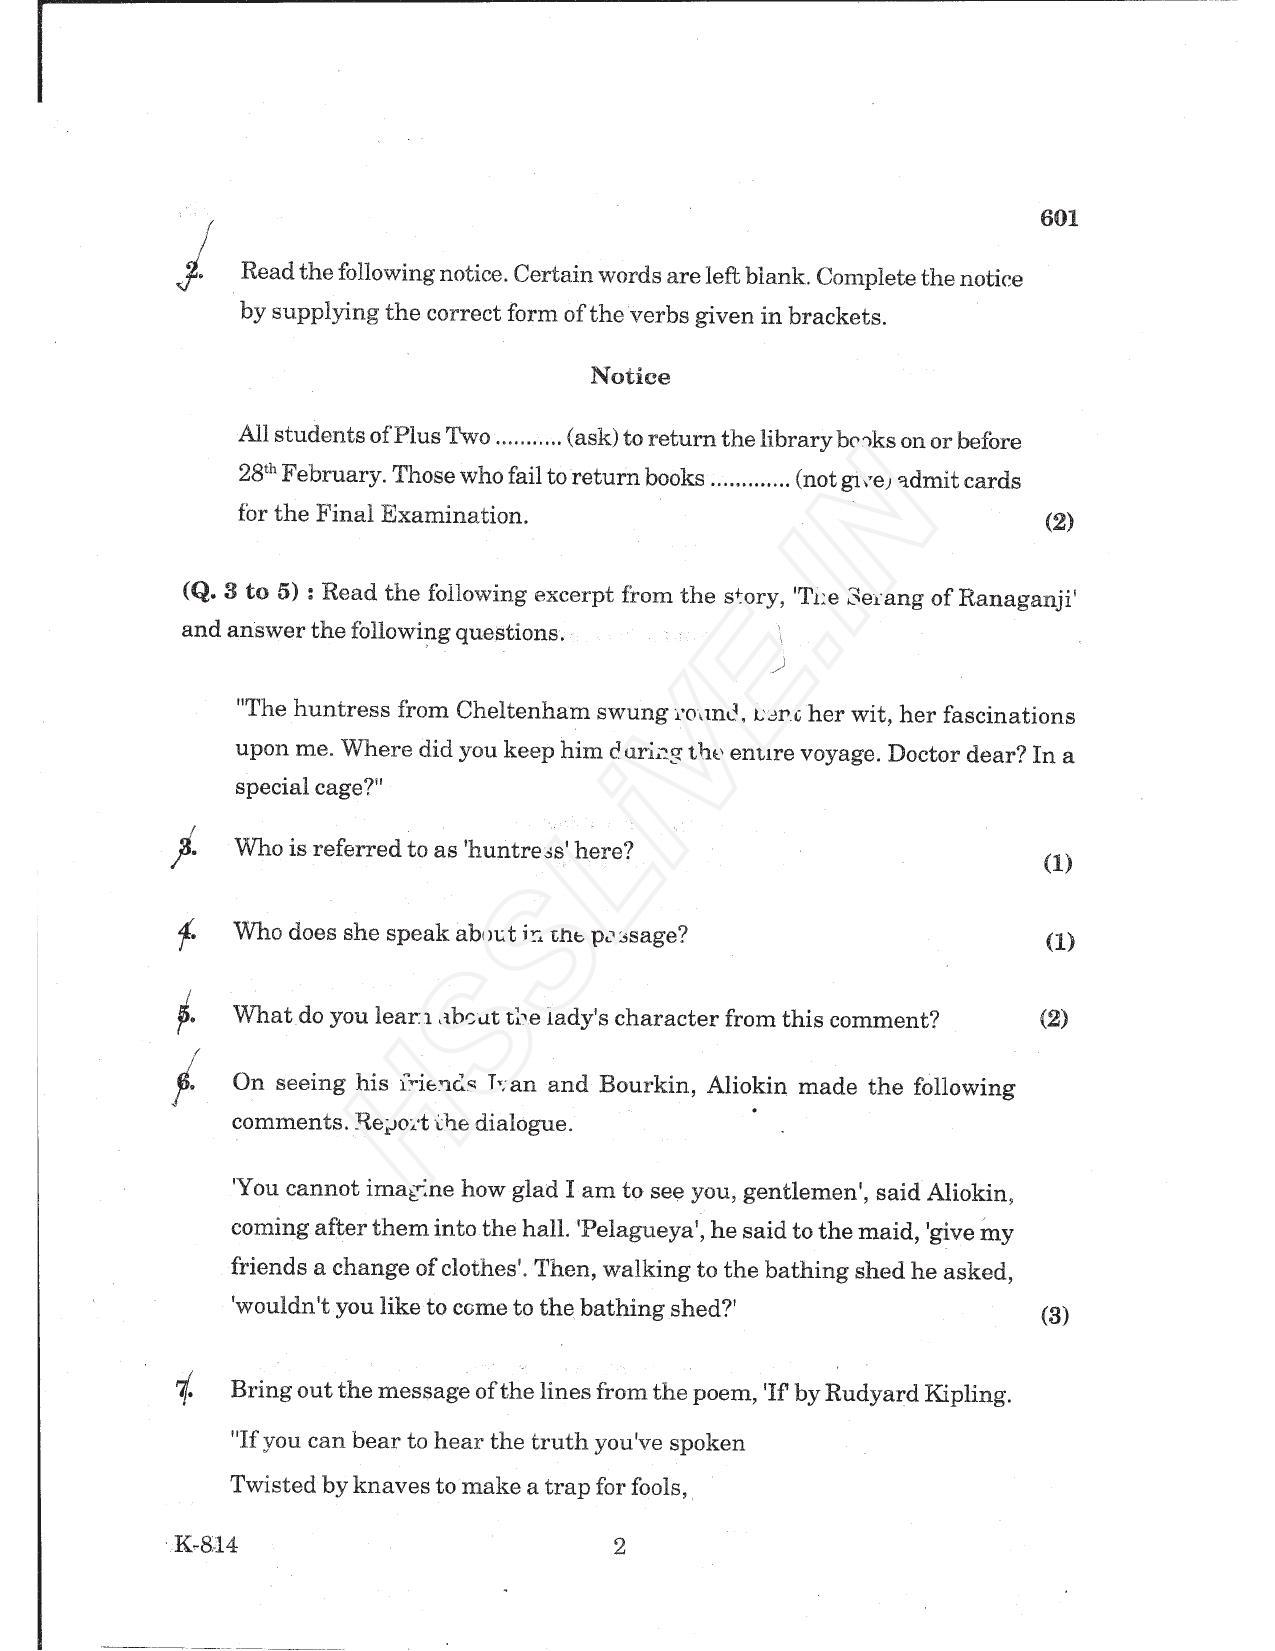 Kerala Plus One 2017 English Question Paper - Page 2